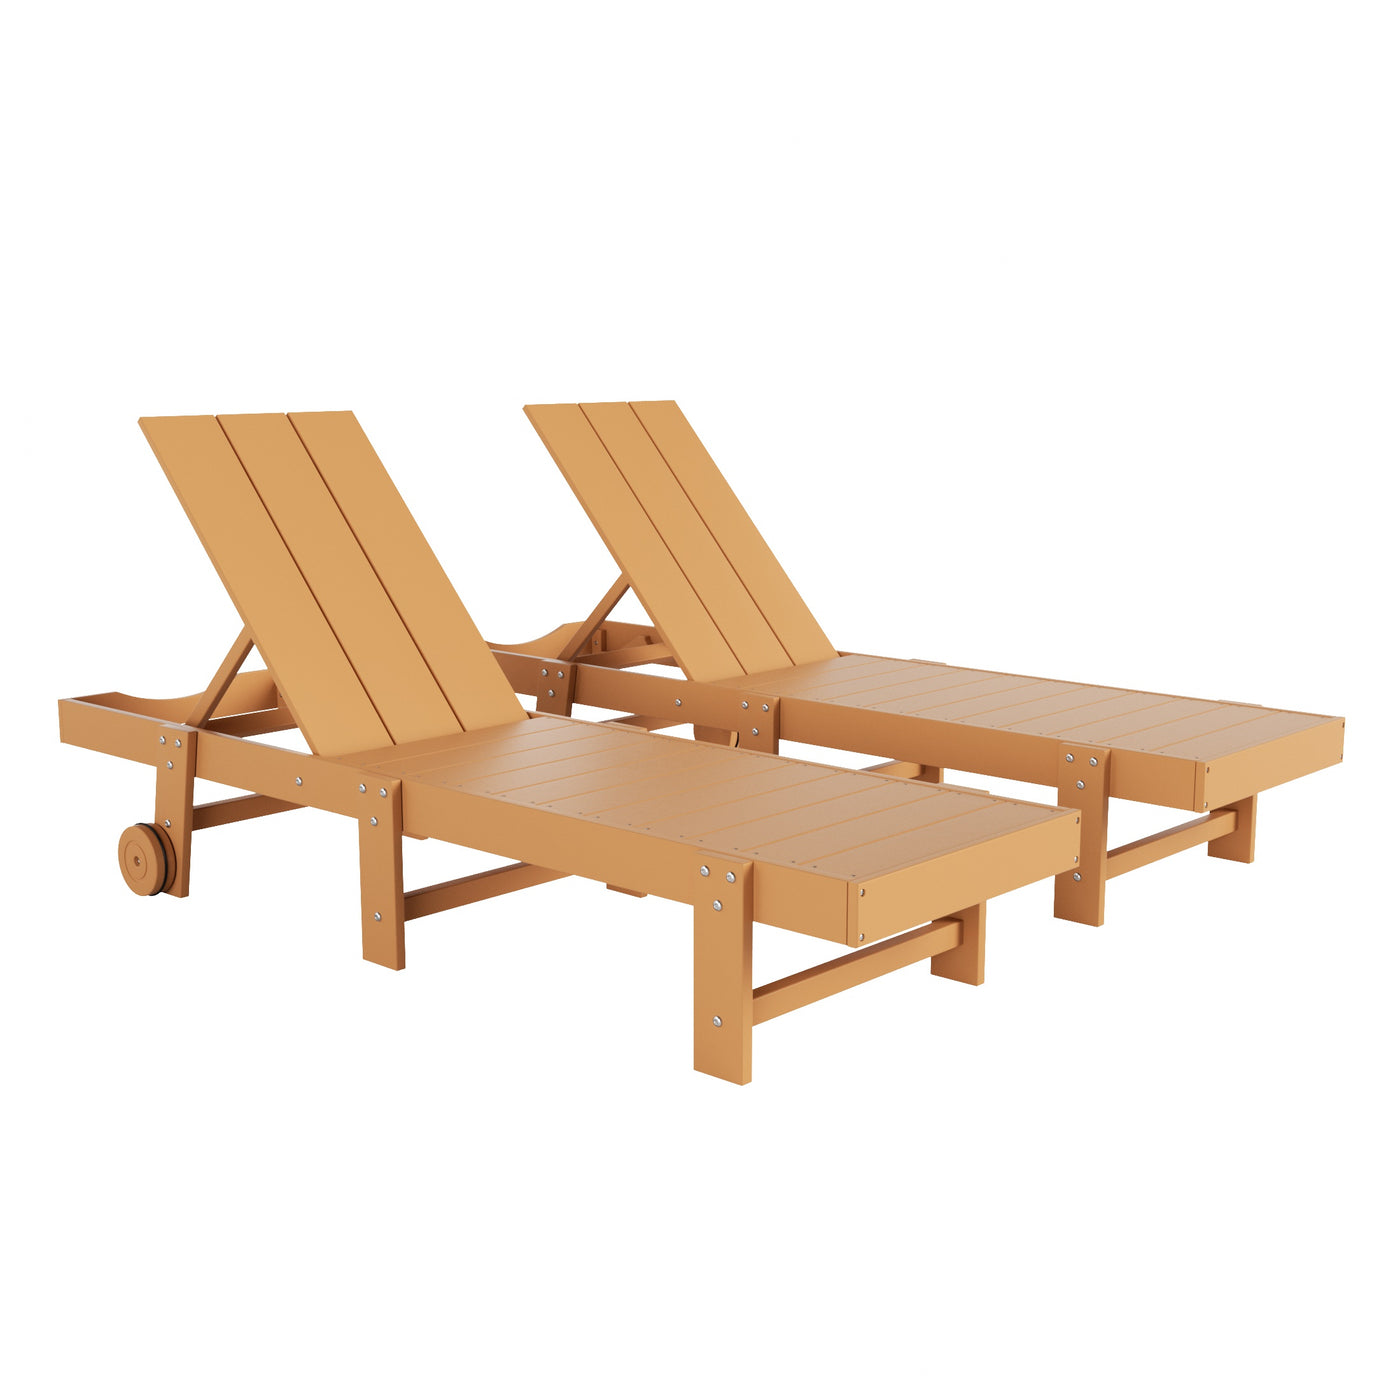 Ashore Modern Poly Reclining Chaise Lounge With Wheels